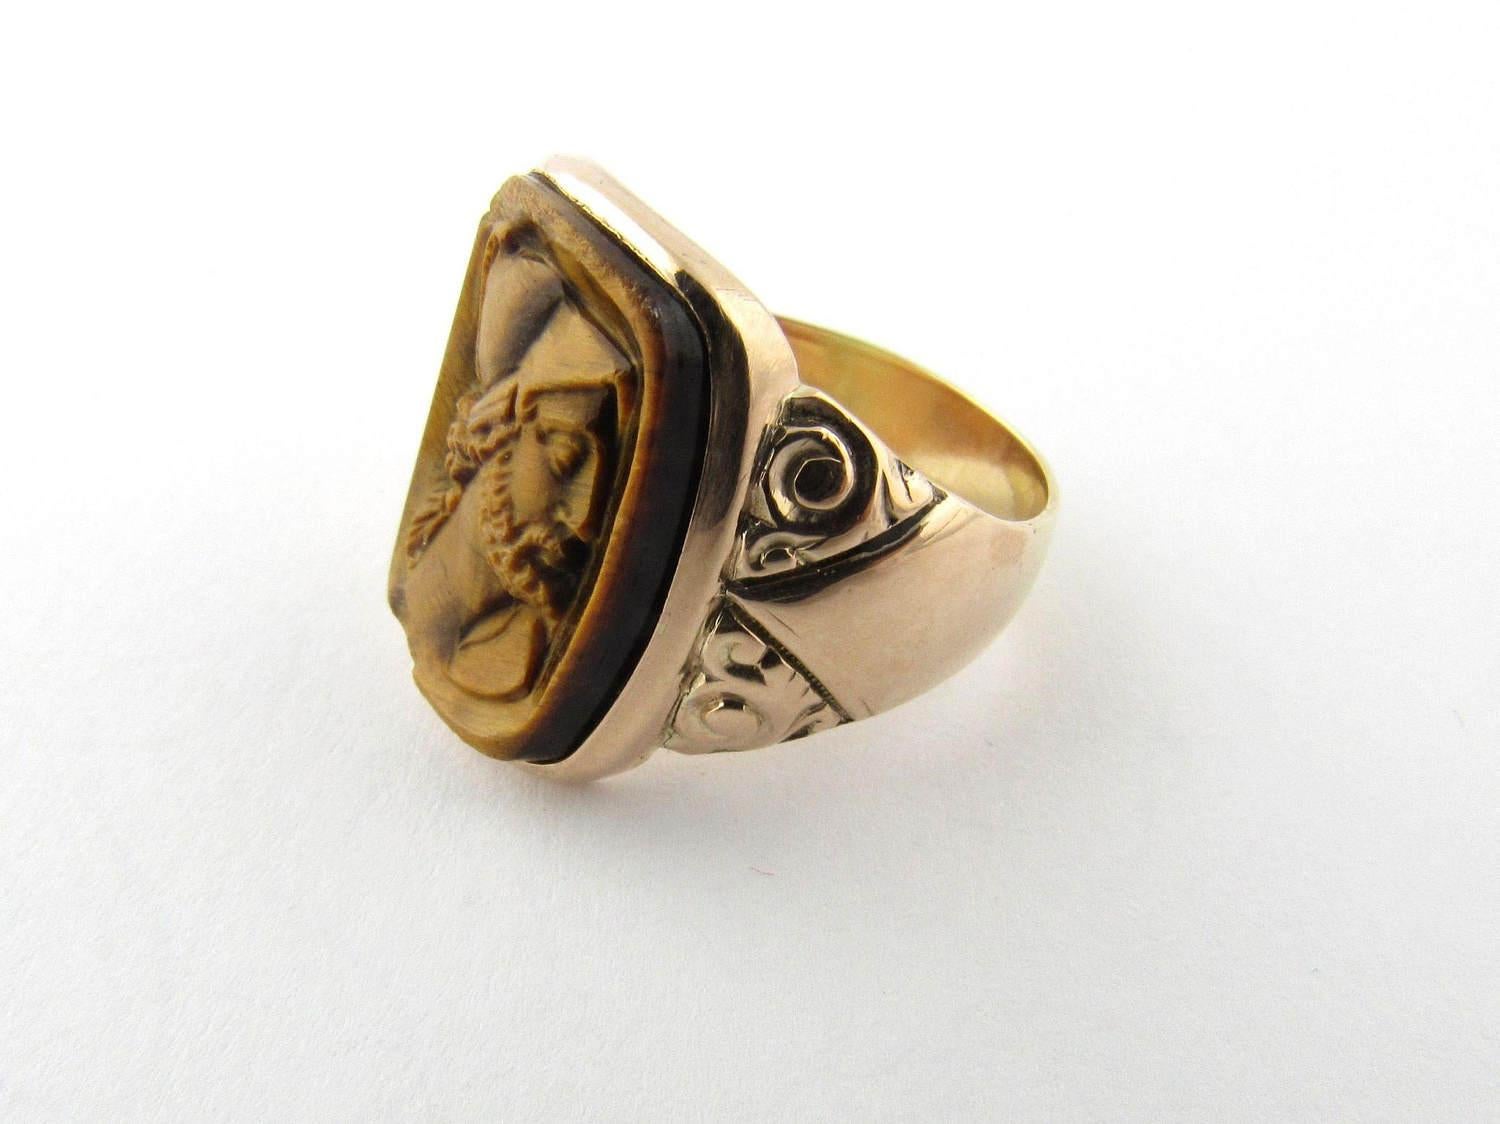 Antique Edwardian 14 Karat Yellow Gold Tiger's Eye Cameo Ring

Mars was the Roman God of war and the most prominent of the military gods in the religion of the Roman army. 

This cameo ring features Mars as a Roman soldier carved in genuine tiger's